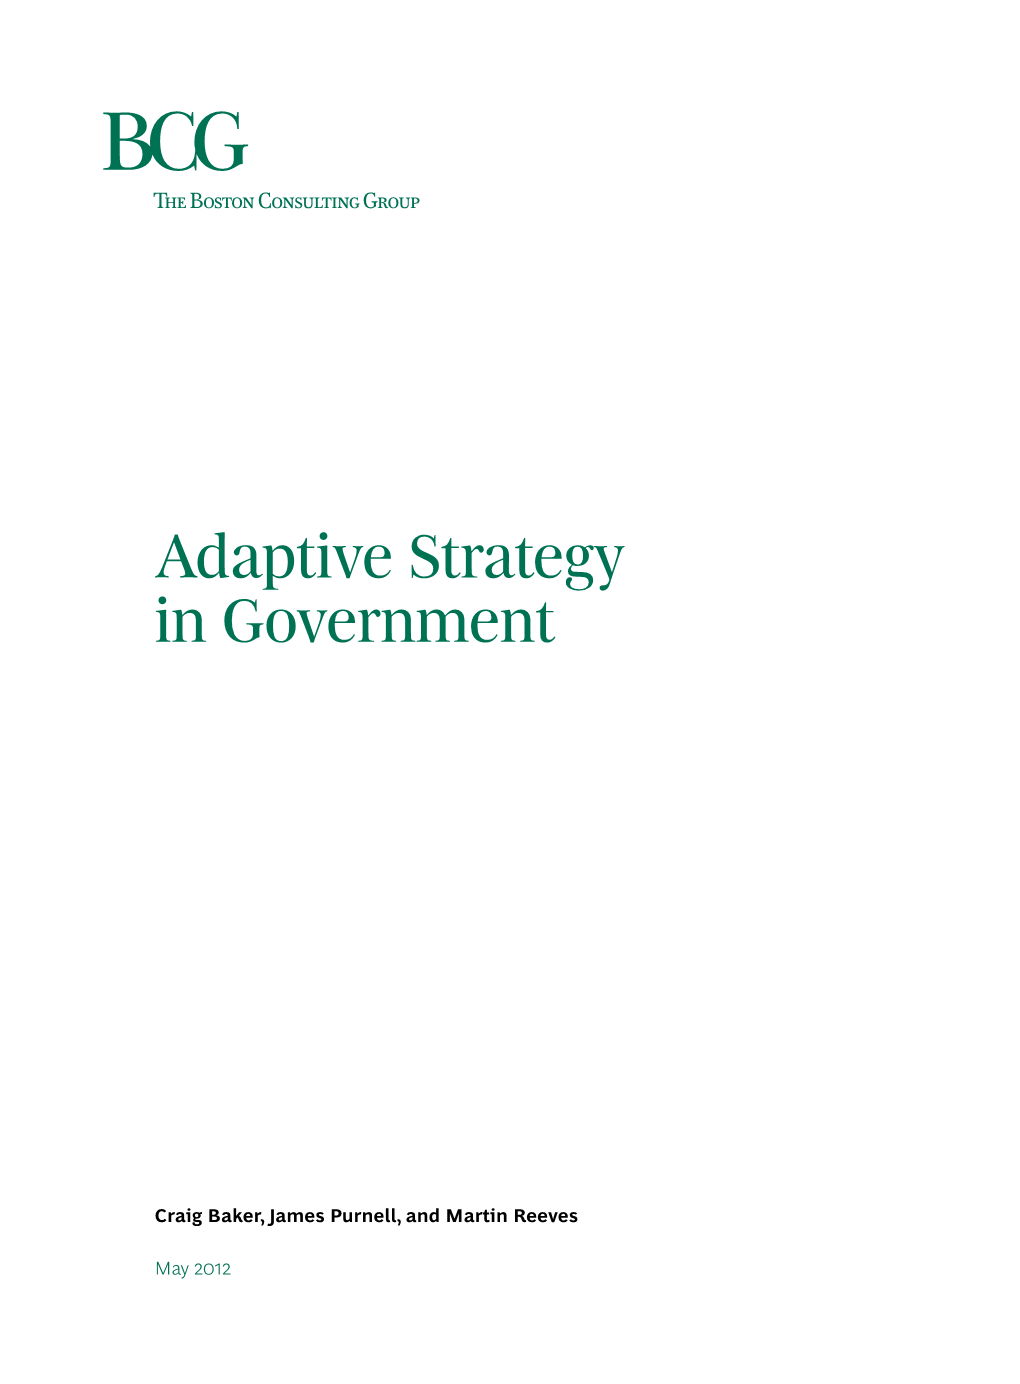 Adaptive Strategy in Government